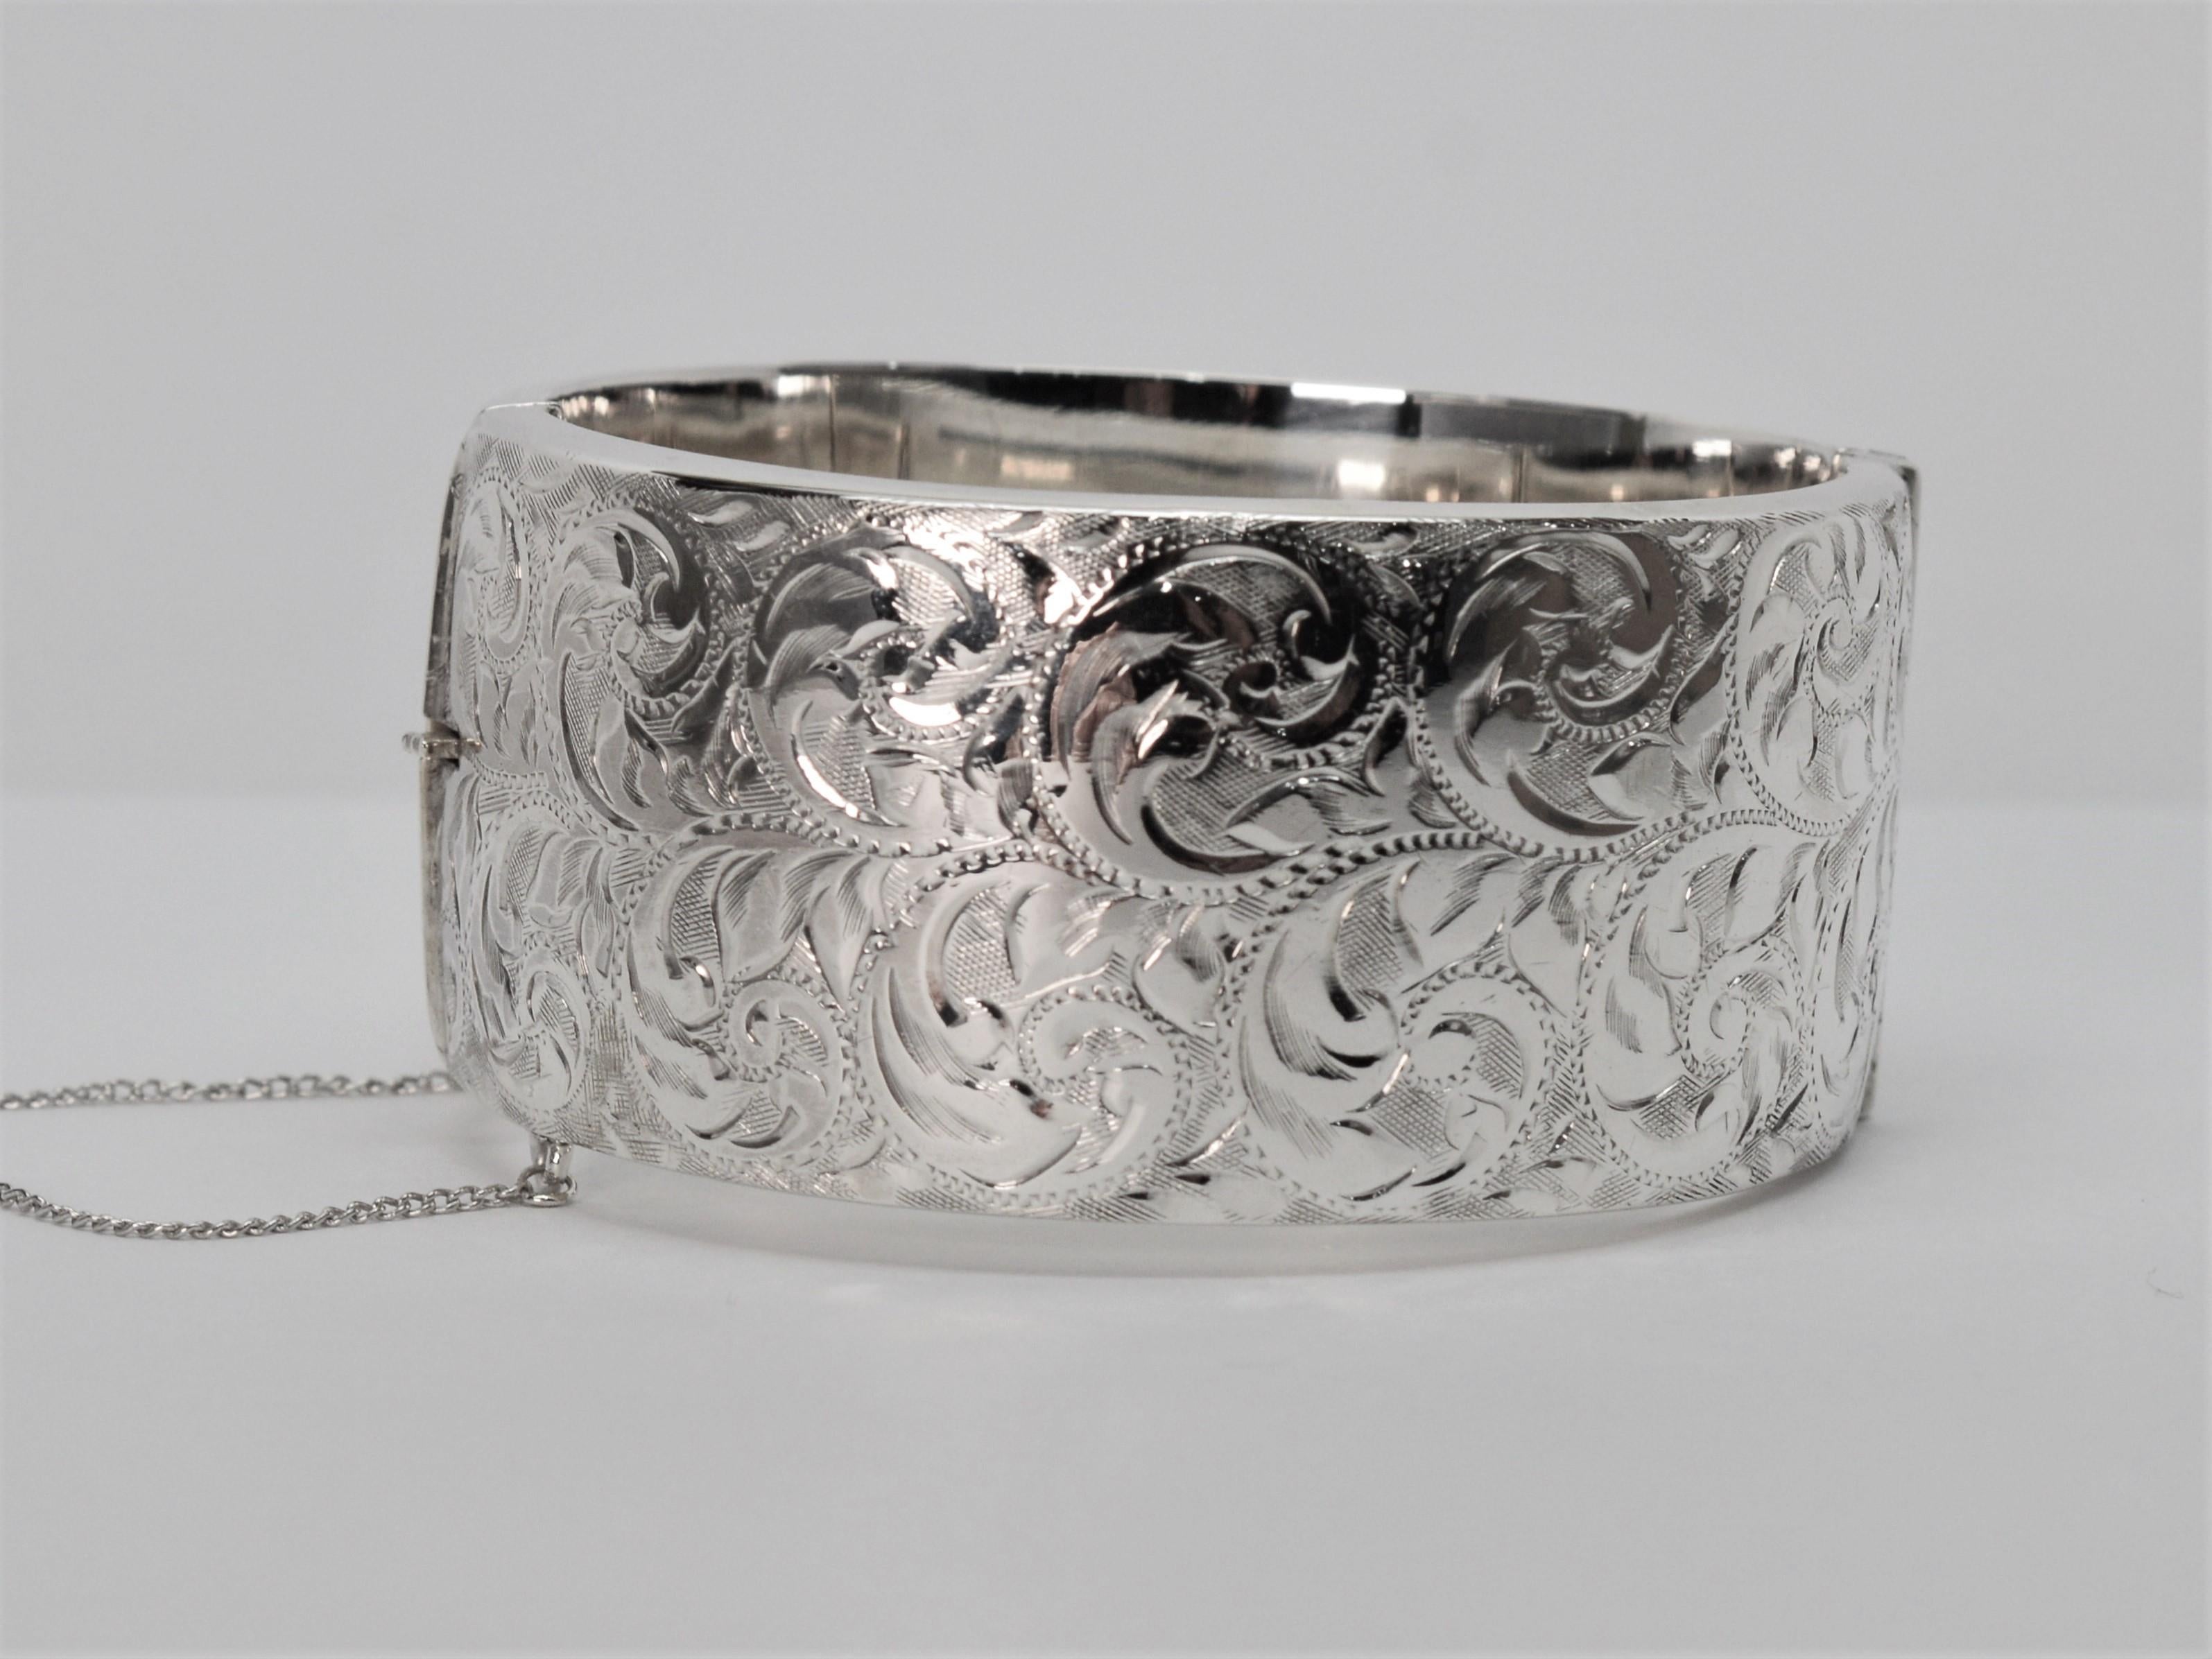 For vintage silver lovers by CPS Jewelry Company, Birmingham, England, this highly polished 1-1/4 inch wide sterling bangle bracelet boldly presents a decorative hand engraved pattern design on it's face and a smoothly finished back. To determine